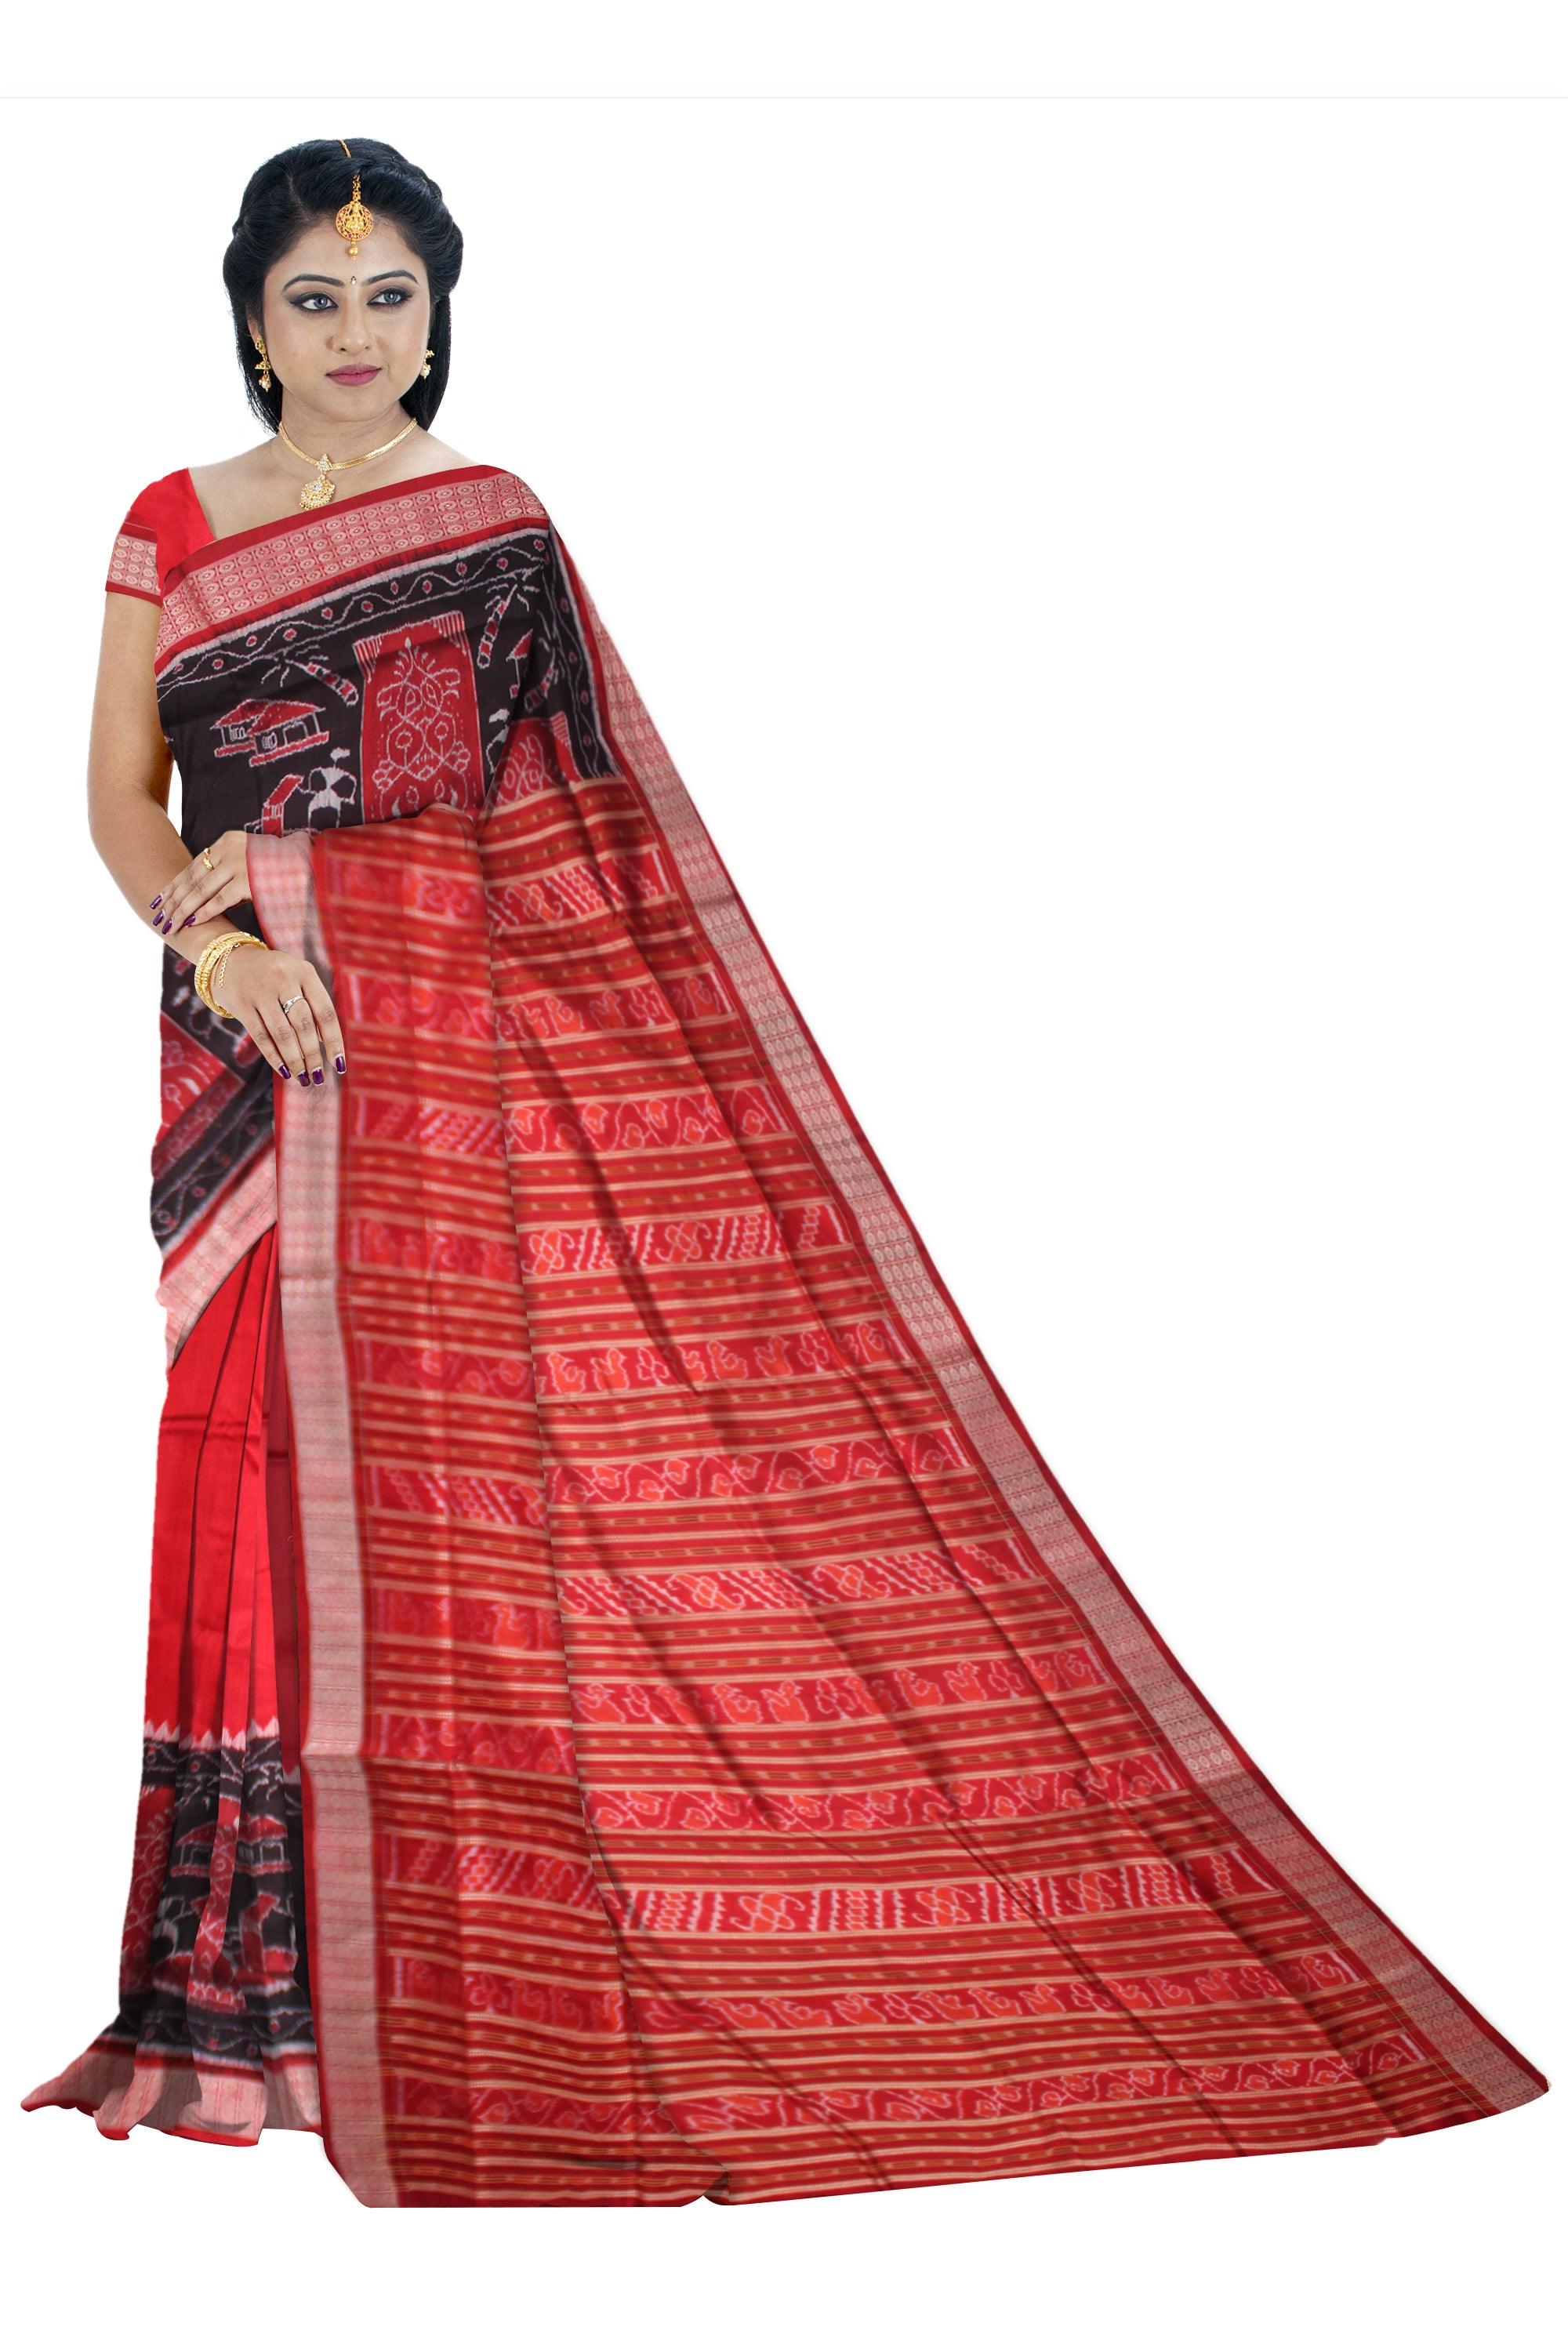 NEW LOOK SONEPUR PURE PATA SAREE IN RED AND BLACK COLOR WITH BLOUSE PIECE. - Koshali Arts & Crafts Enterprise